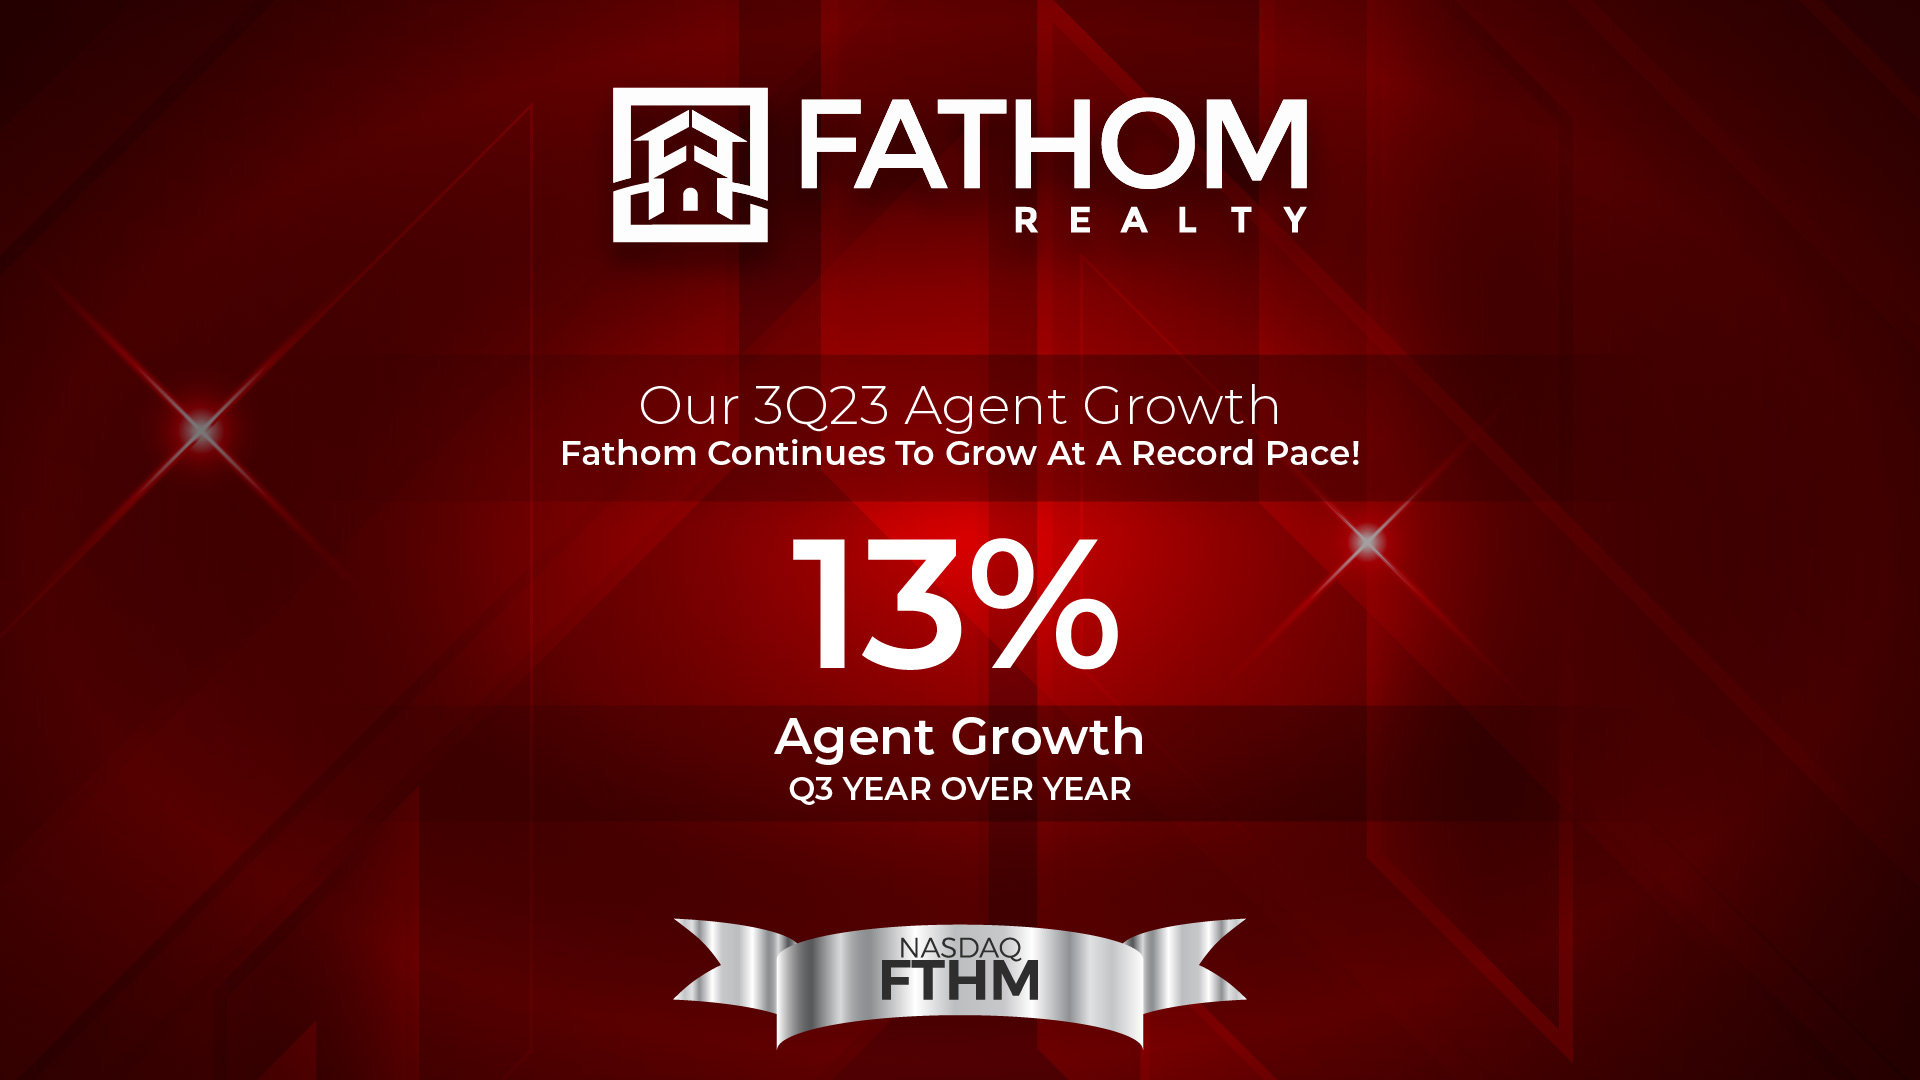 Featured image for “Fathom Holdings Reports Strong Agent Growth Despite Market Challenges”